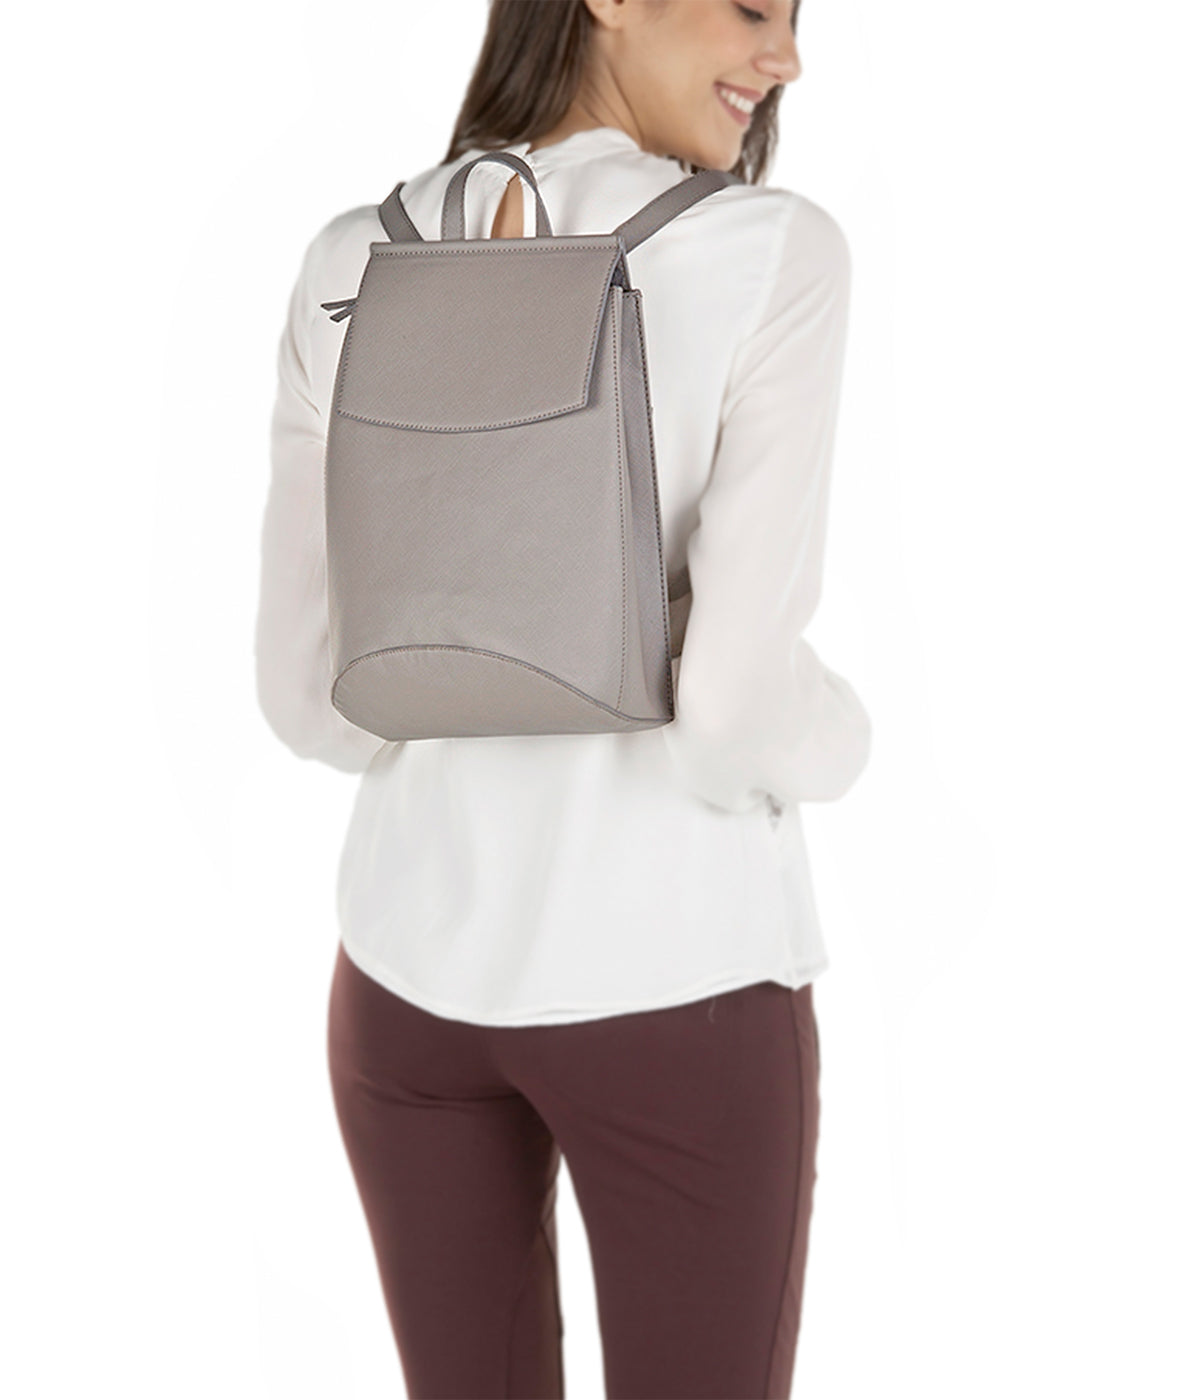 Mona B Convertible Daypack for Offices Schools and Colleges with Stylish Design for Women: Storm